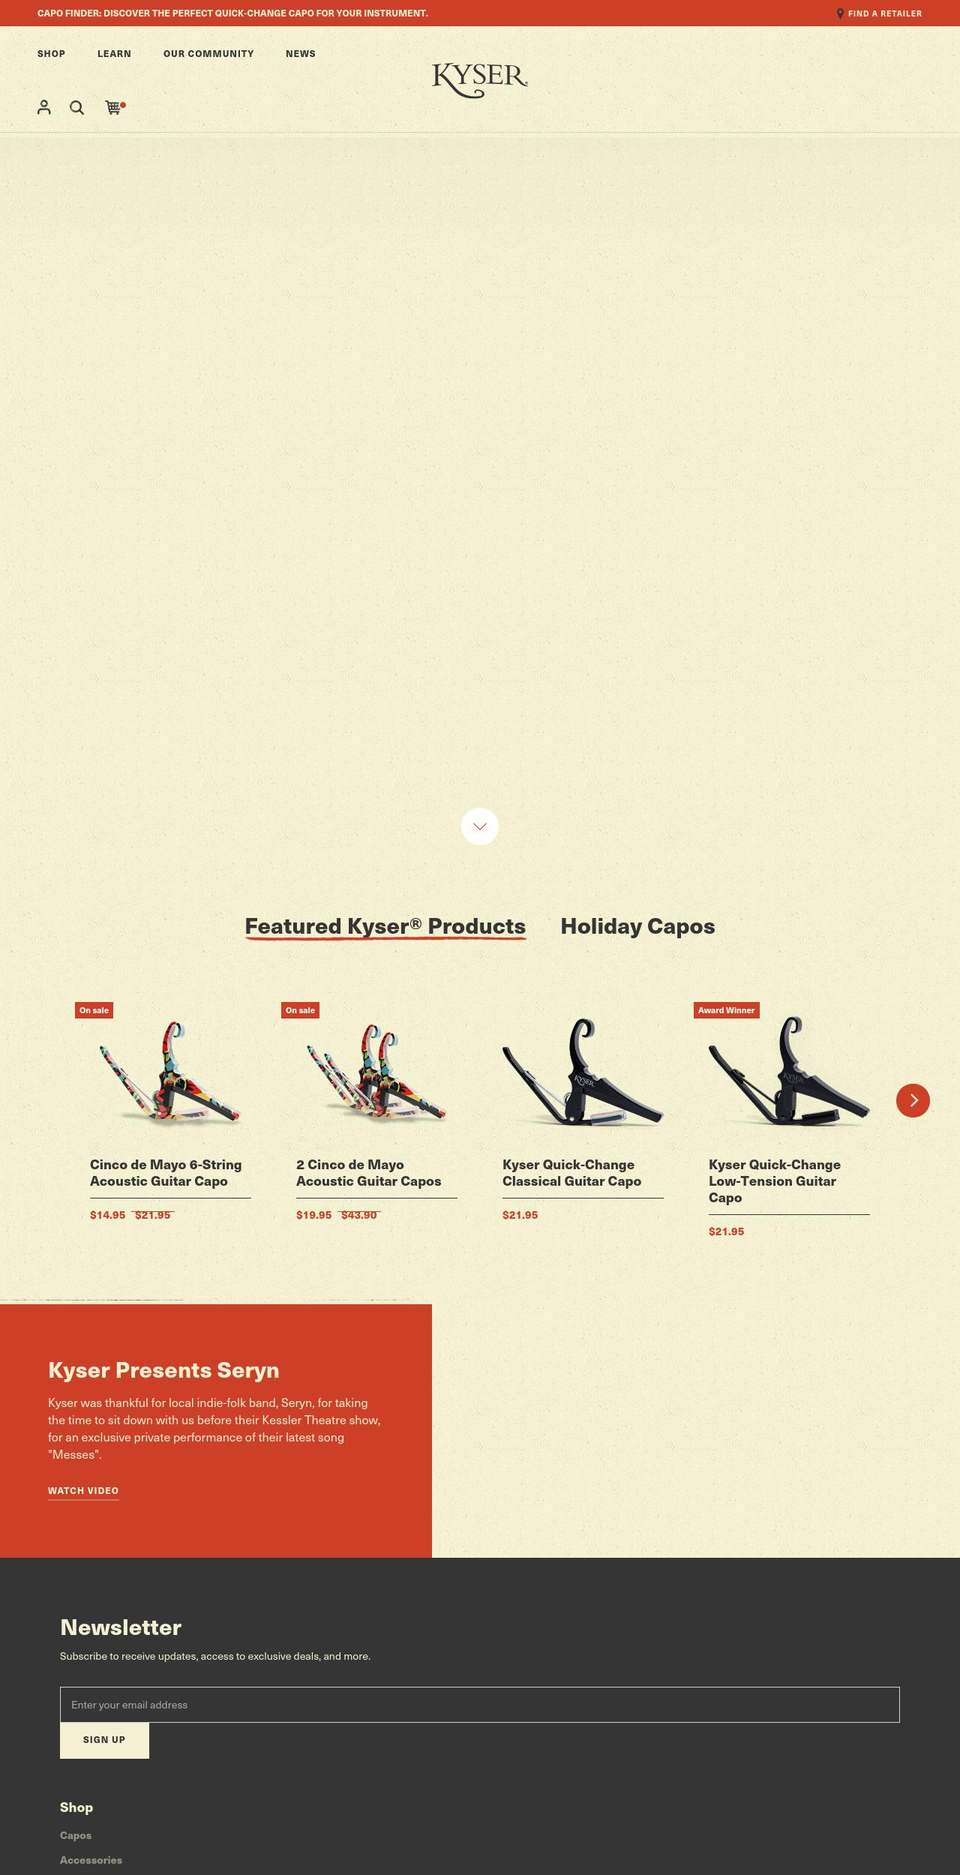 Kyser - ITG Shopify theme site example kyser.ru